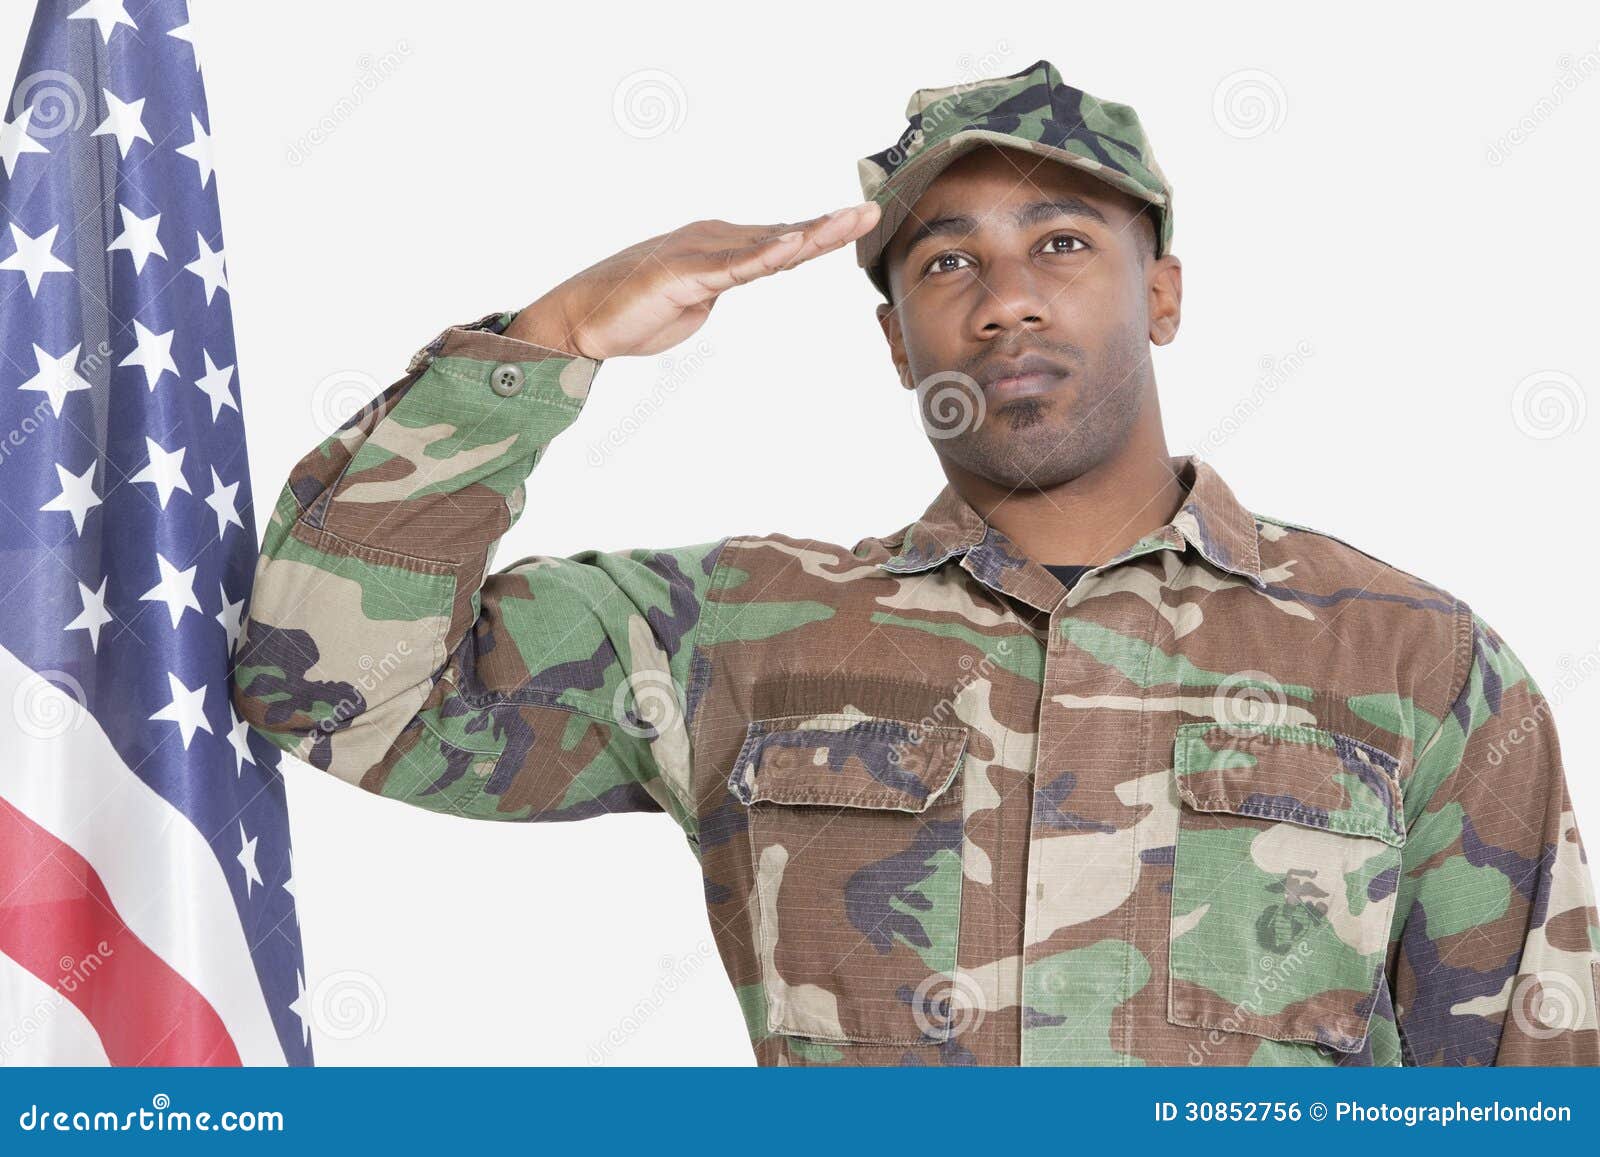 soldiers saluting the flag